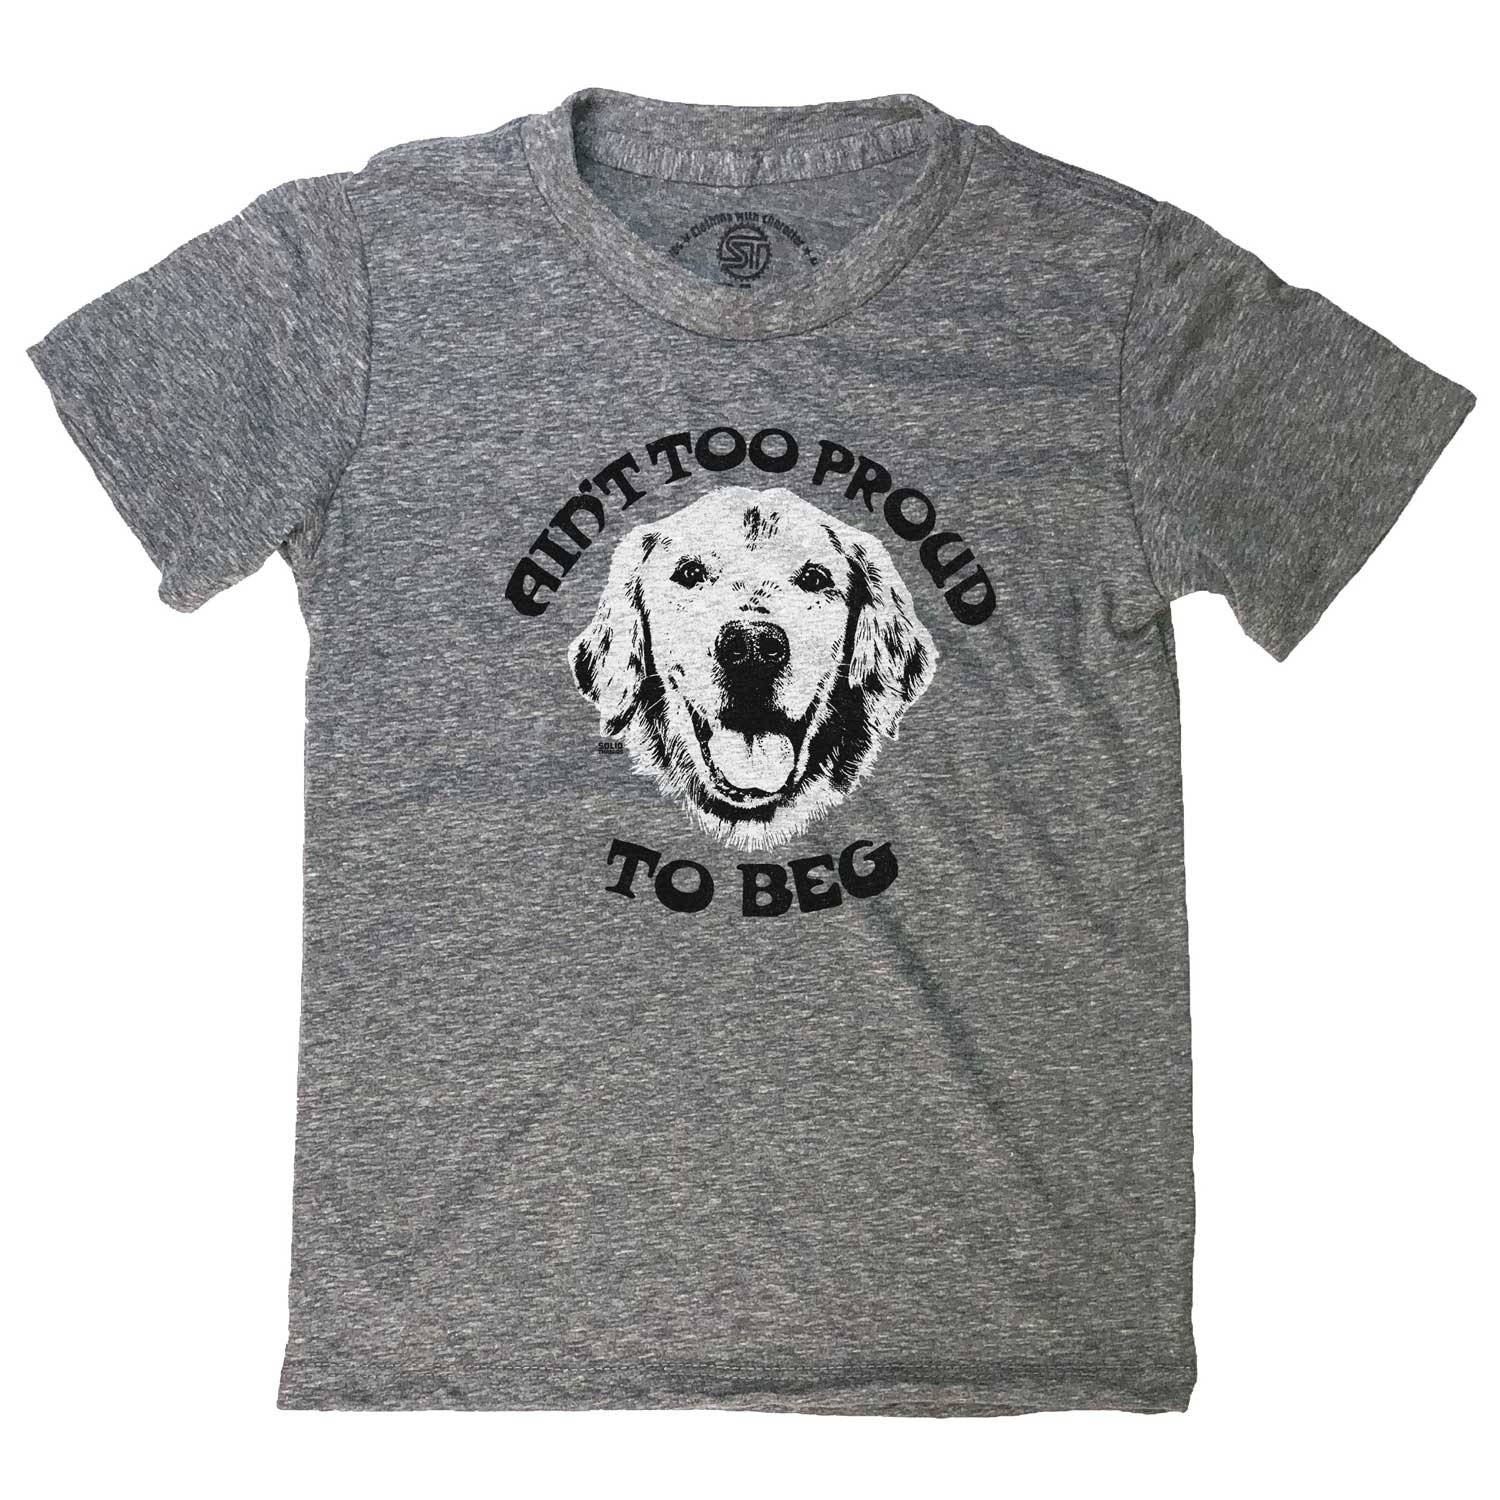 Cute Kid's Ain't Too Proud to Beg Retro Graphic Tee | Funny Dog T-shirt for Youth | Solid Threads